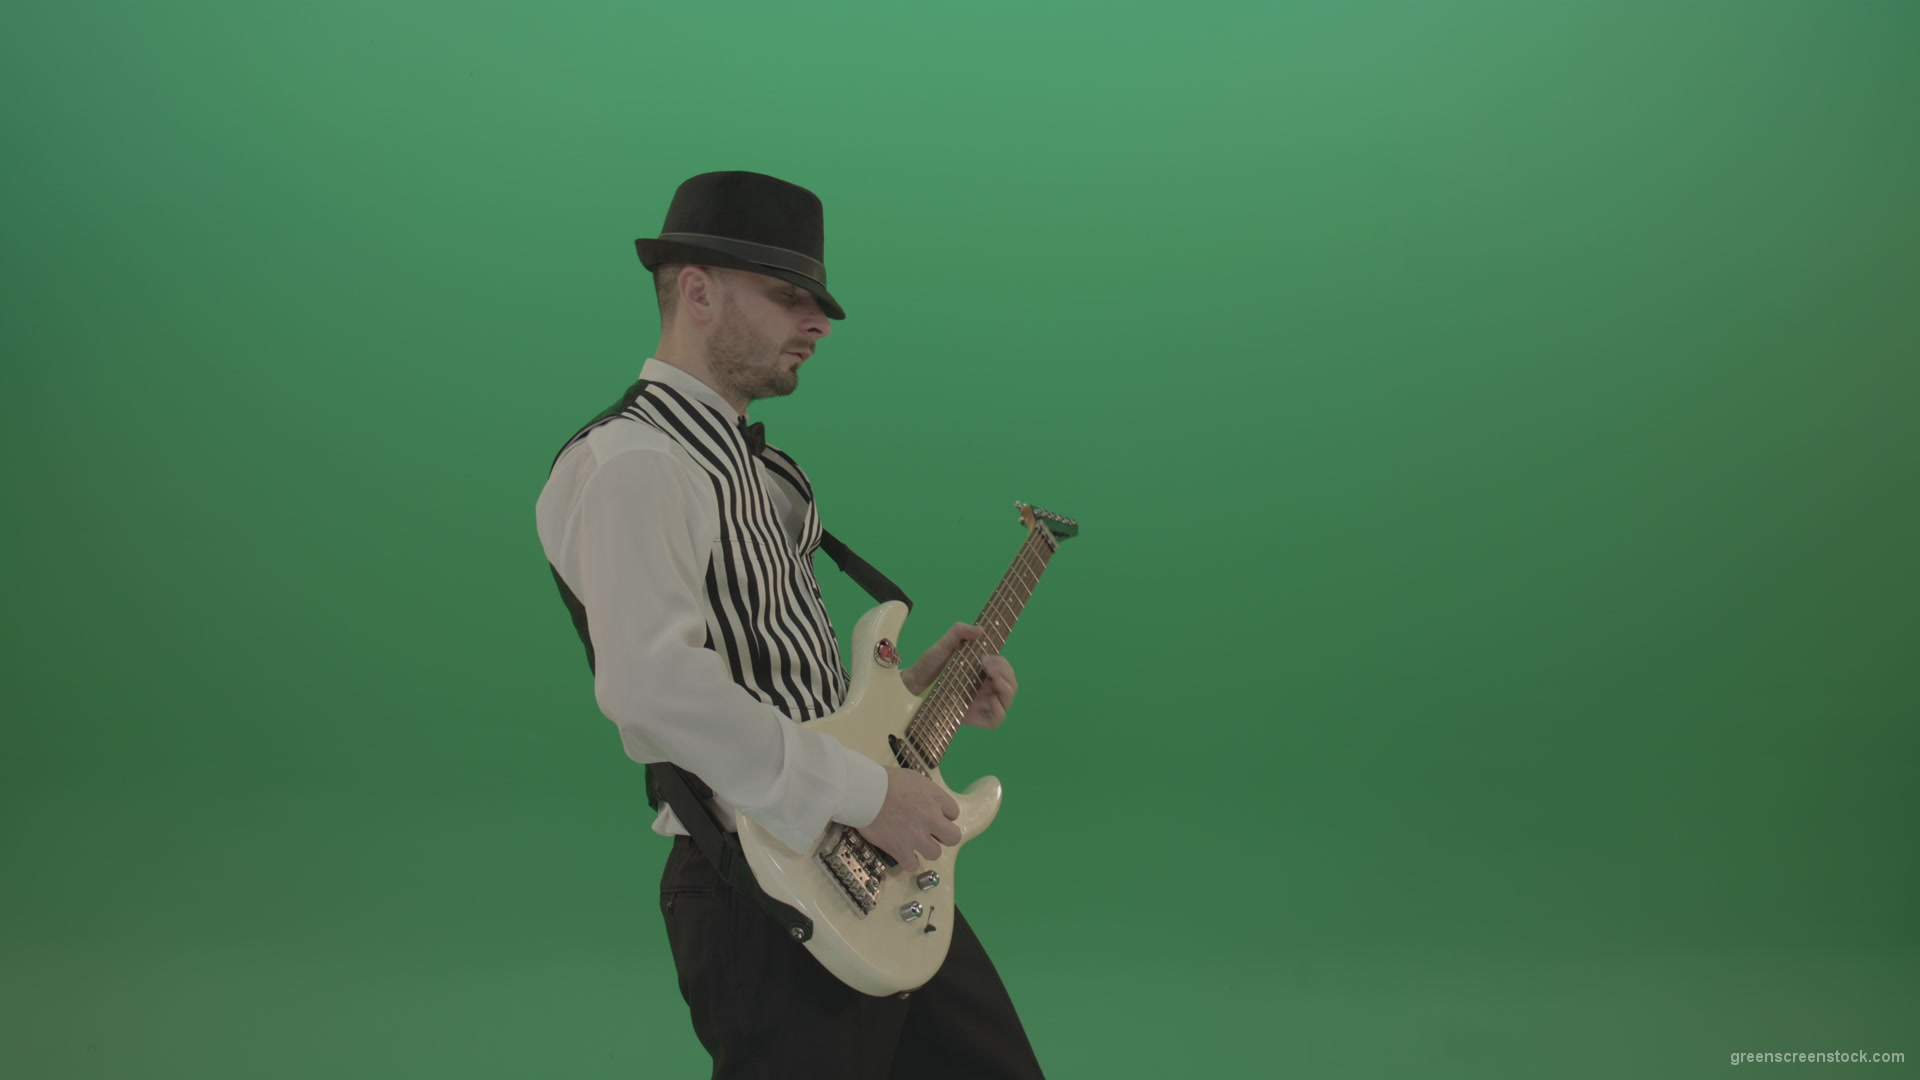 vj video background Classic-jazz-guitarist-play-white-electro-guitar-solo-music-on-green-screen_003